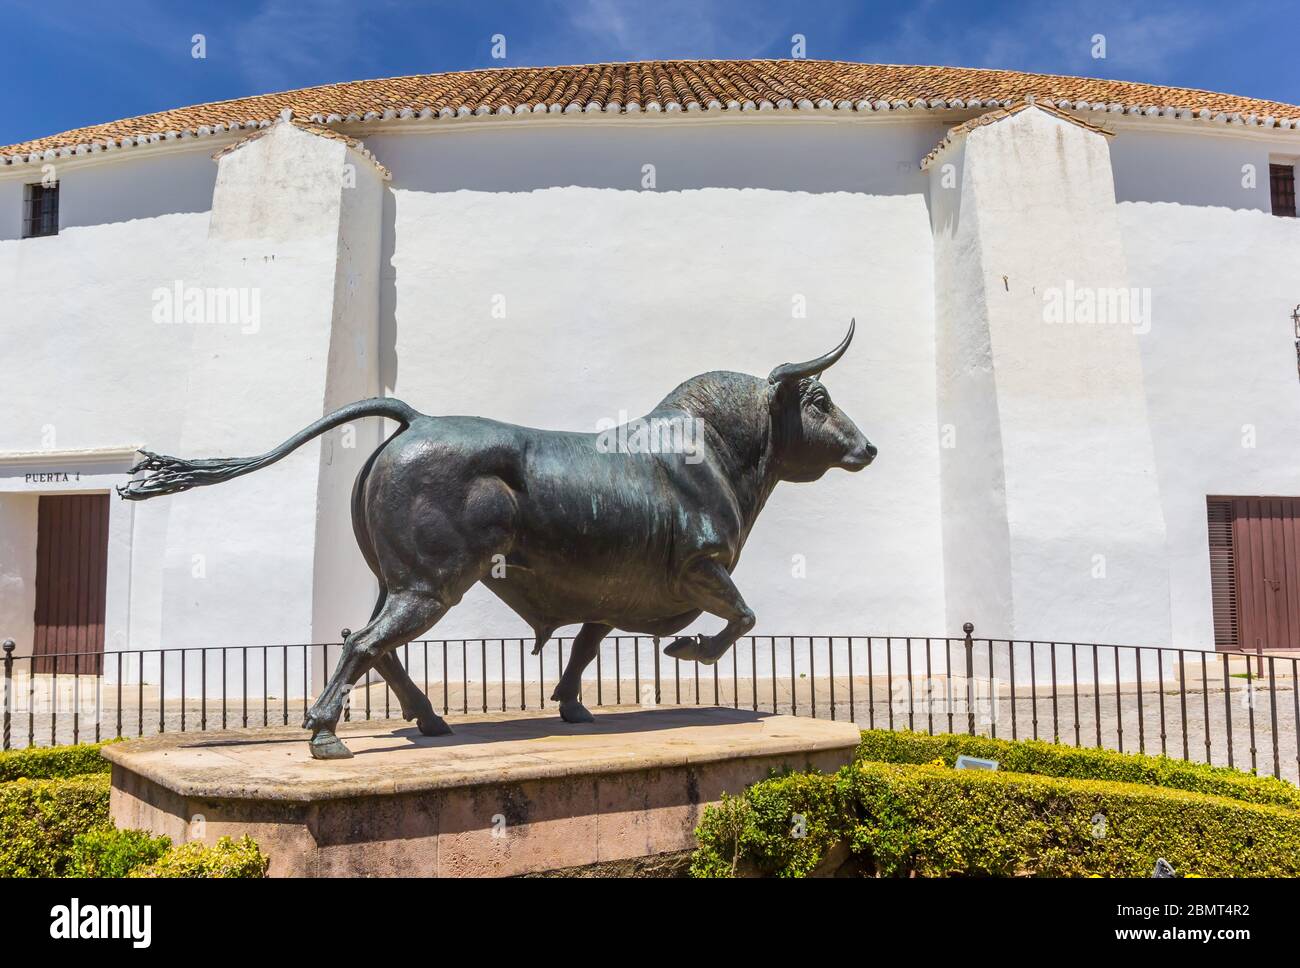 Sculpture of a bull in front of the bullring in Ronda, Spain Stock Photo